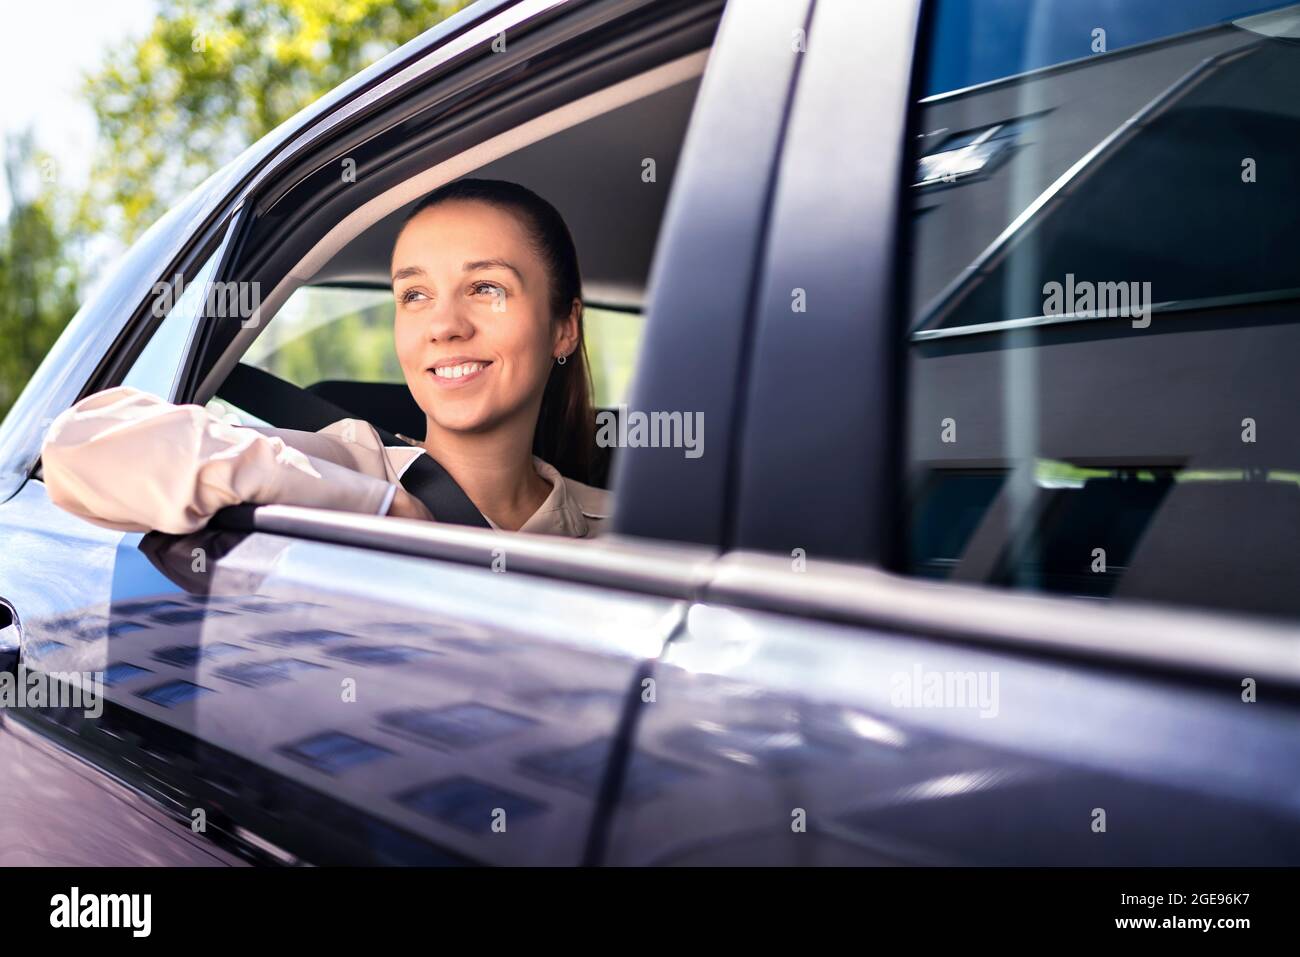 Woman in car as passenger on the backseat. Smiling female customer in taxi cab looking out the window. Happy elegant businesswoman. Stock Photo